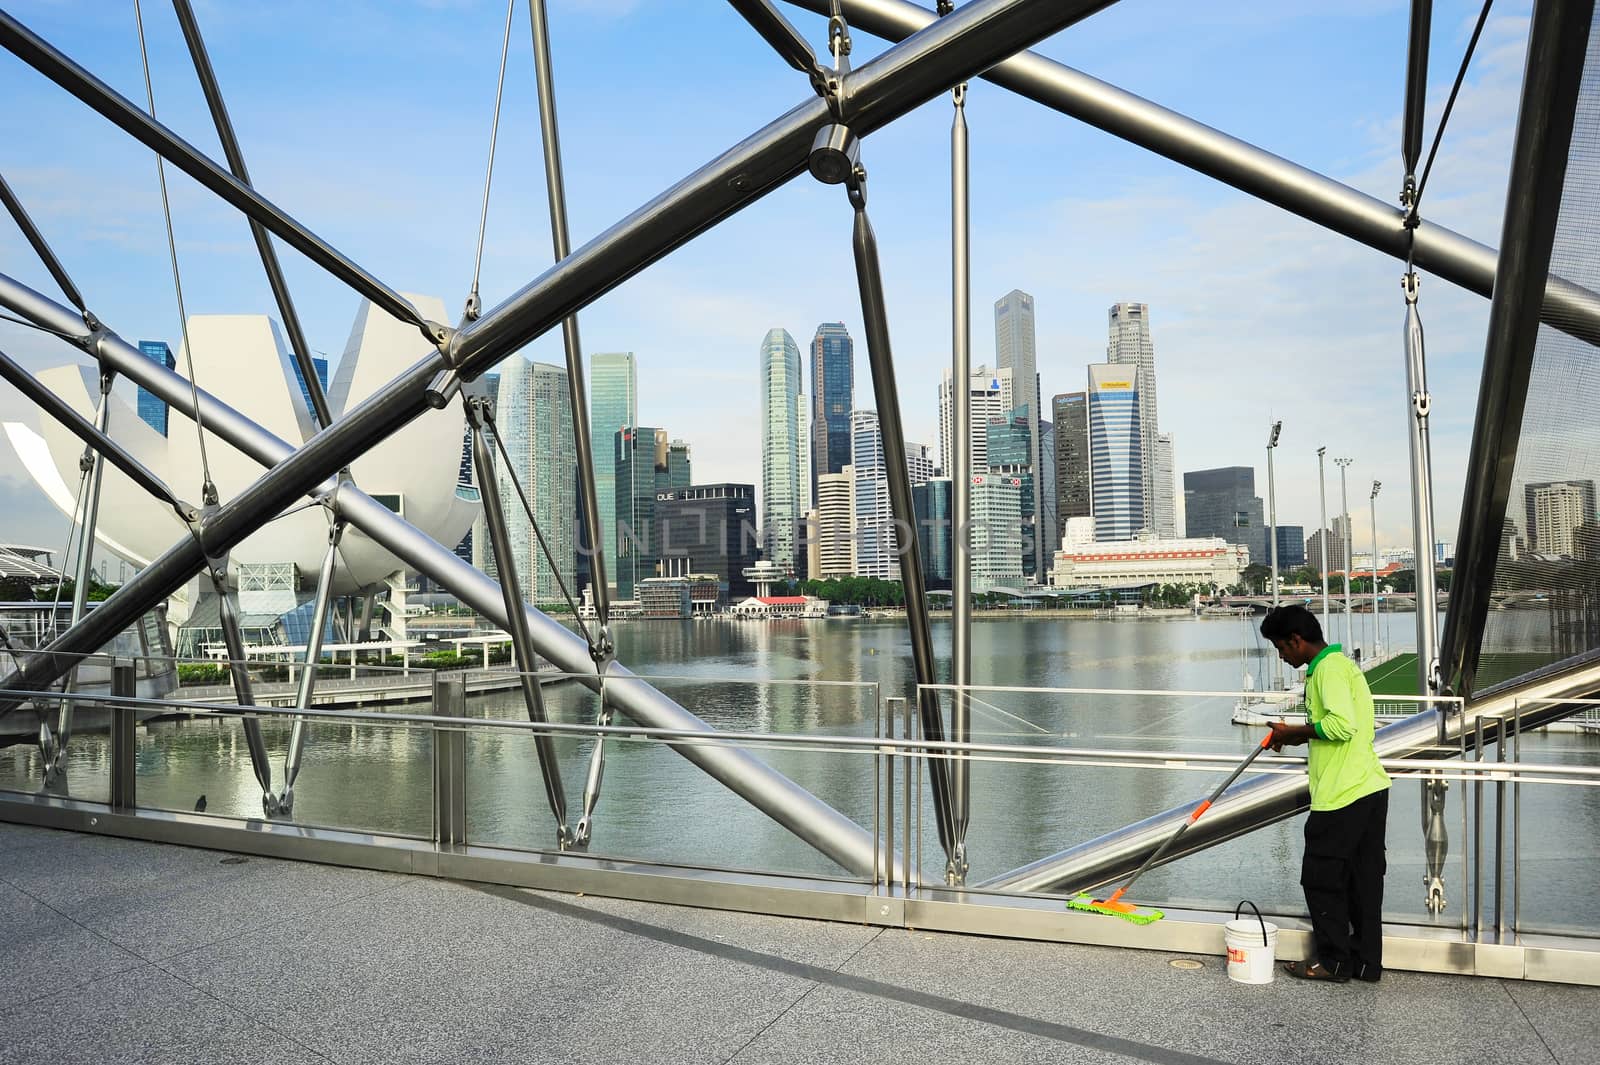 SINGAPORE- MAY 07, 2013: Worker cleaning the Helix bridge in front of Singapore downtown. The Helix is fabricated from 650 tonnes of Duplex Stainless Steel and 1000 tonnes of carbon steel.